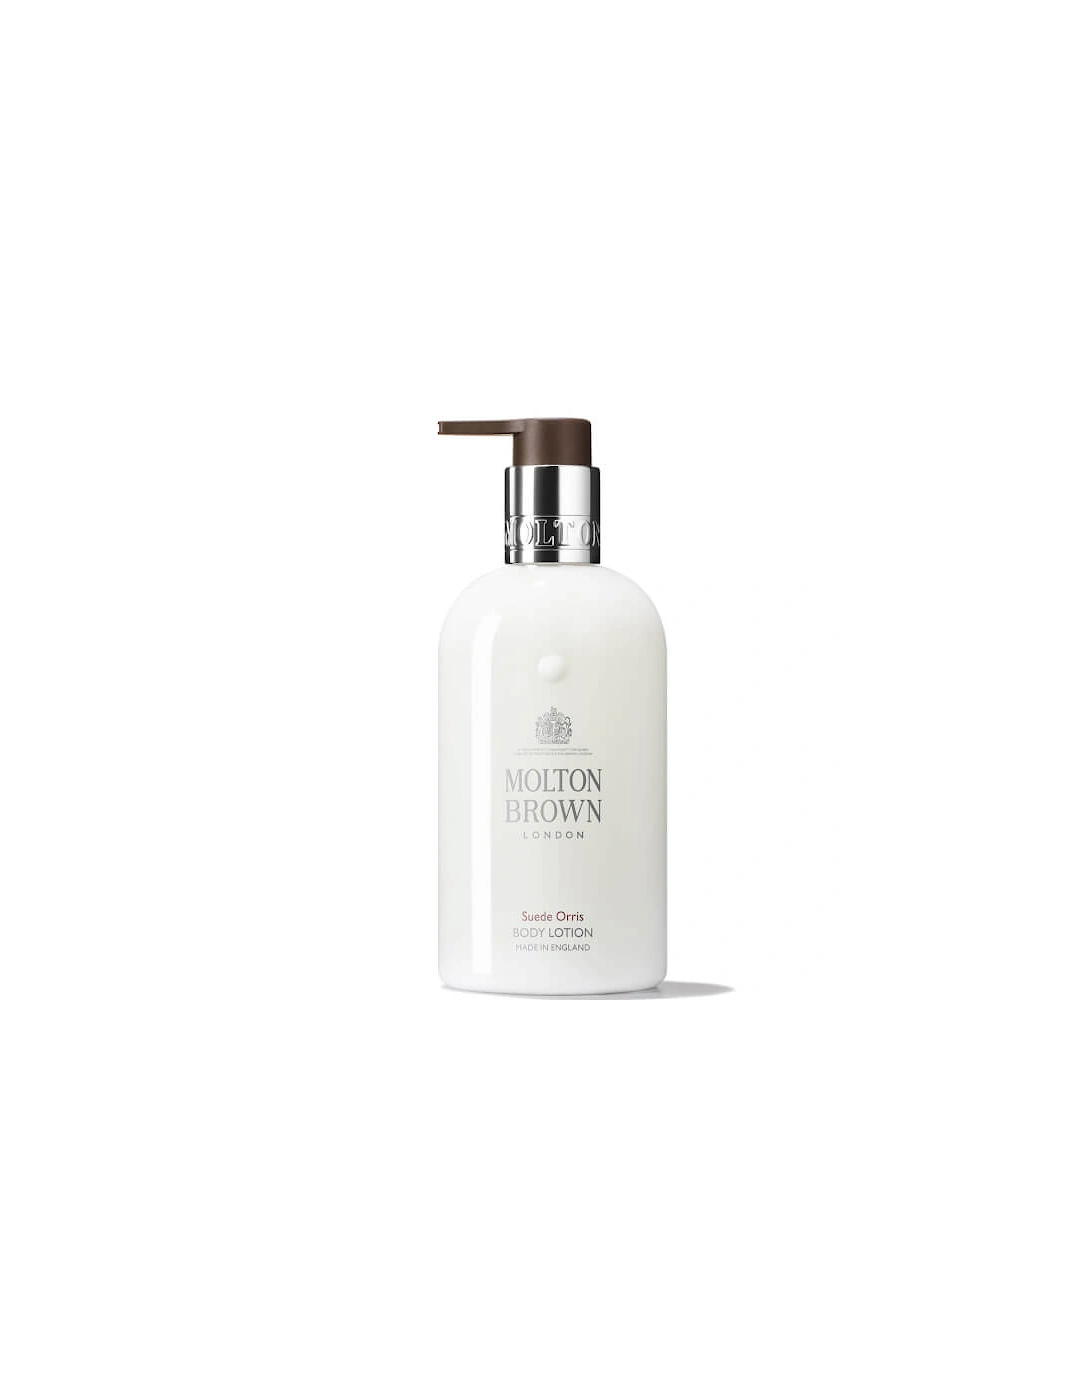 Suede Orris Body Lotion, 2 of 1